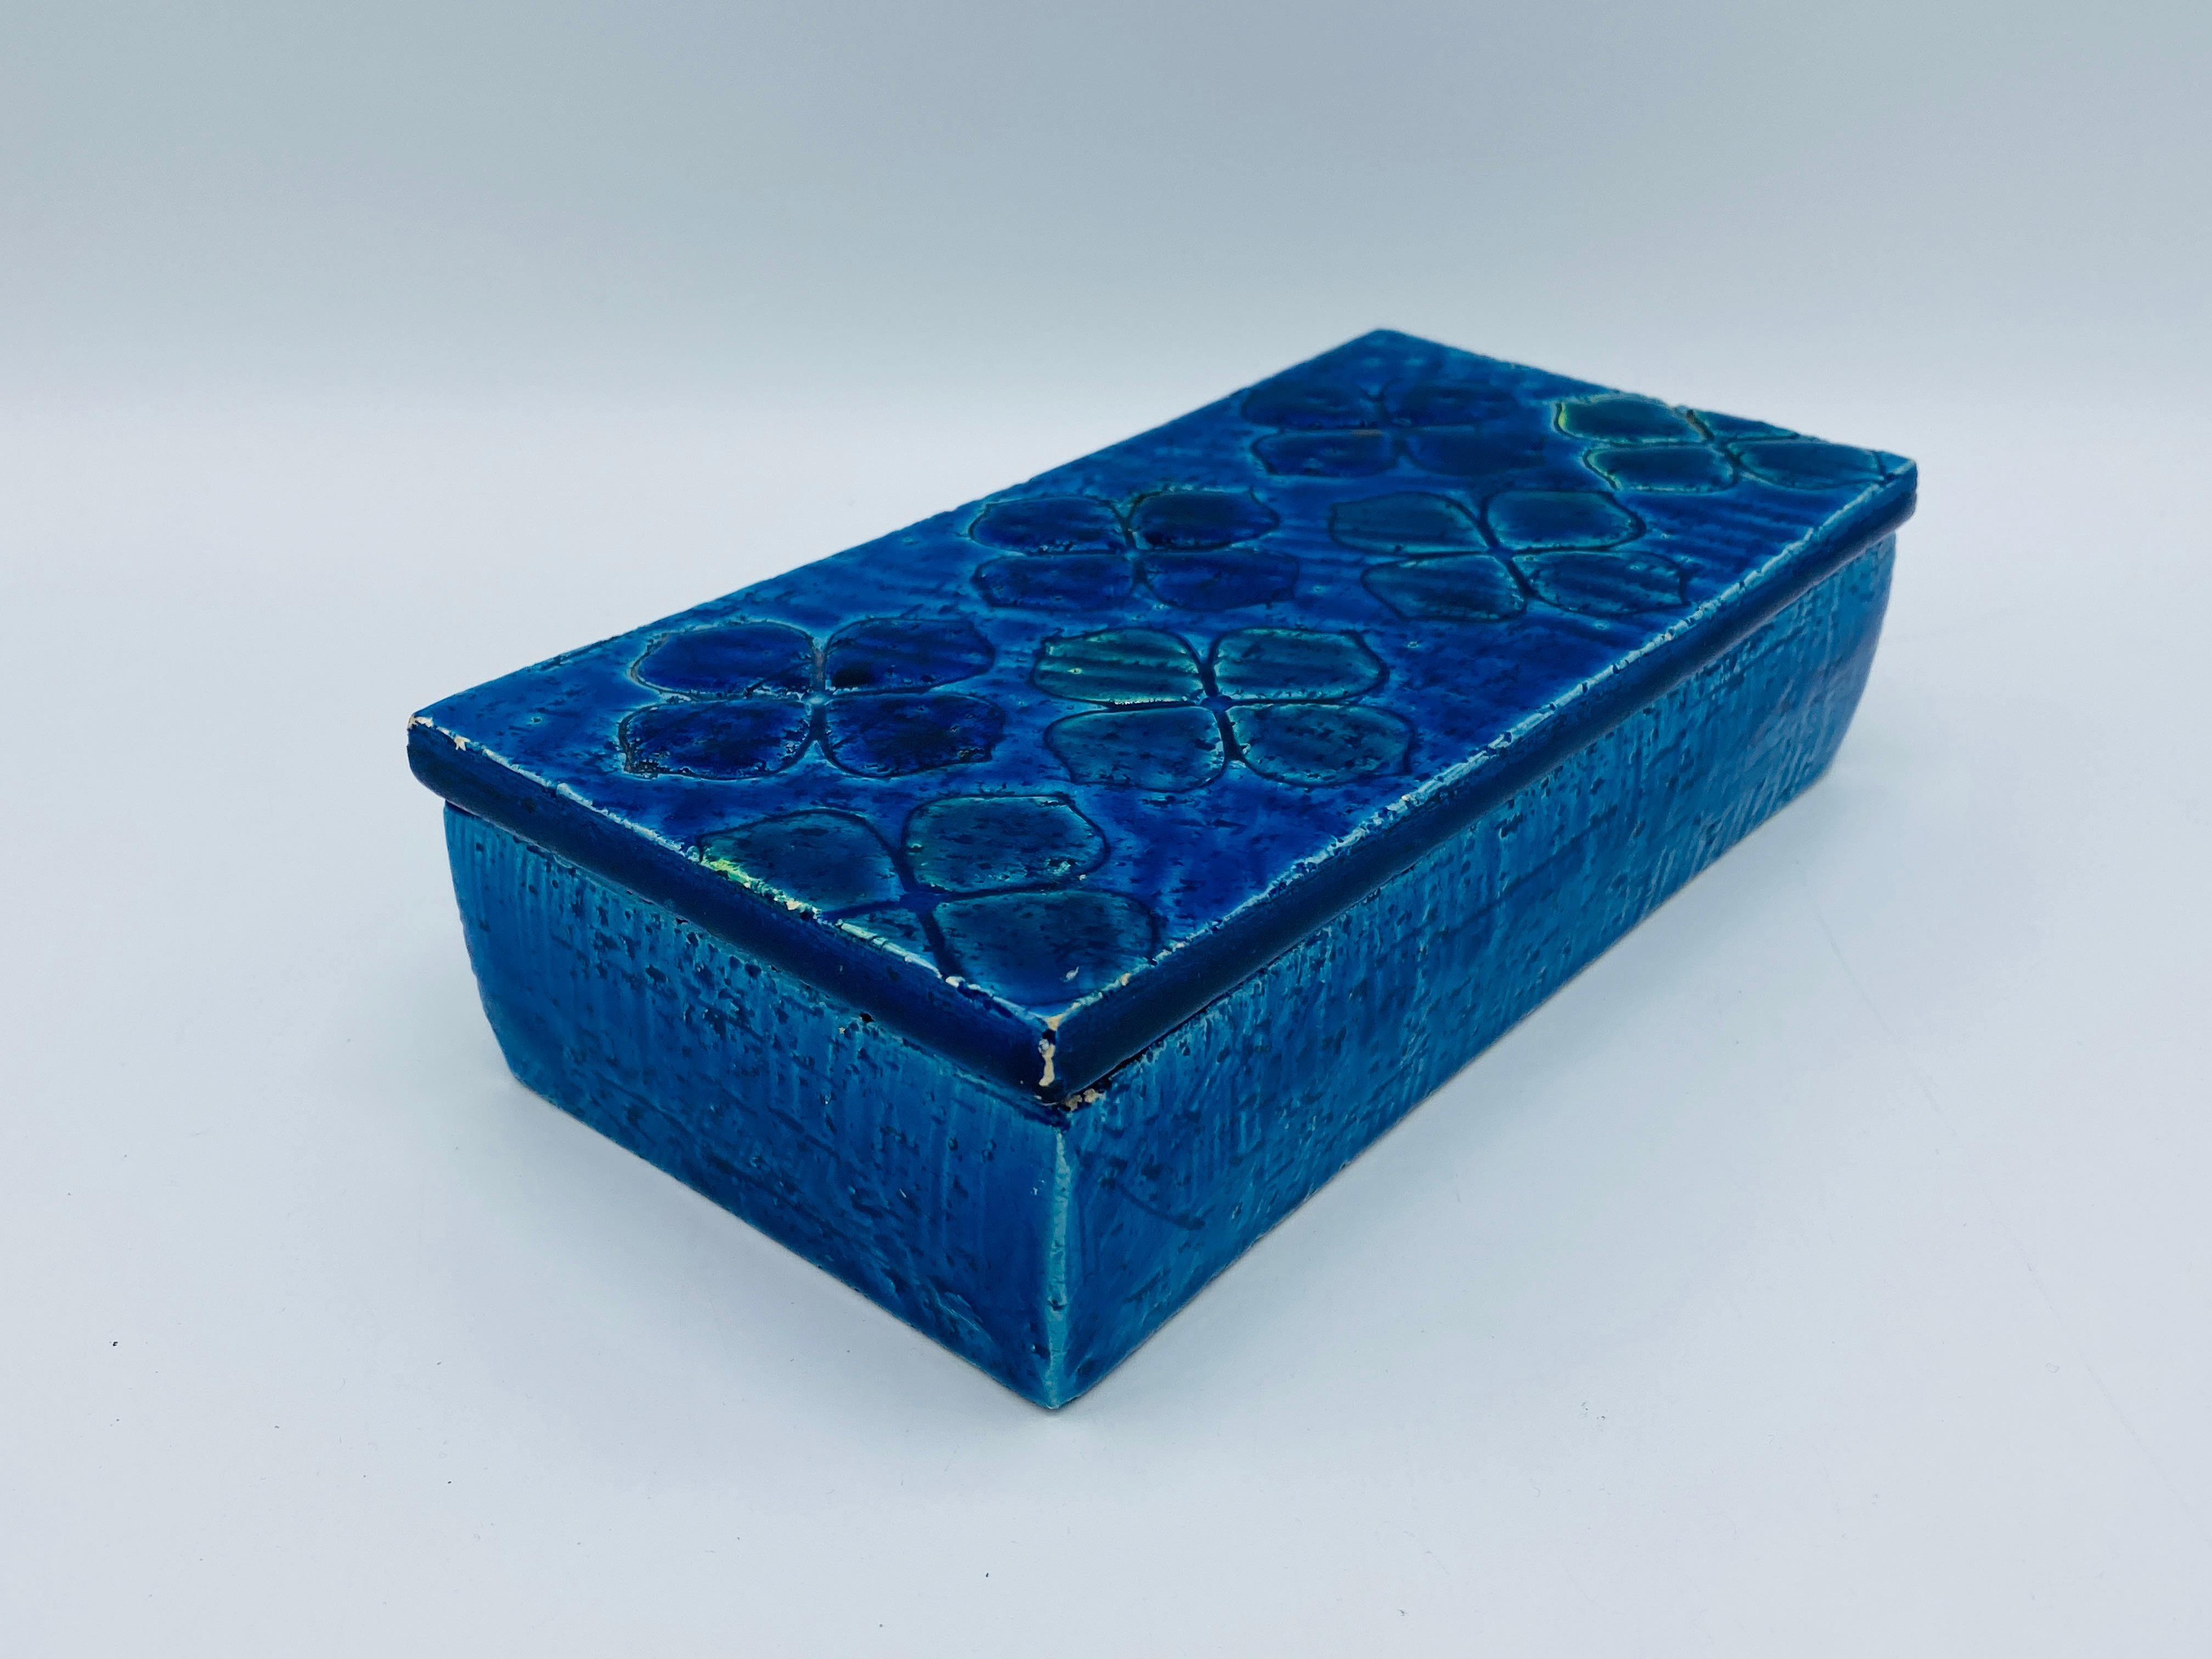 Offered is an absolutely stunning and extremely rare, 1960s Italian Aldo Londi for Bitossi 'Blue Rimini' clover lidded box. The piece has a beautiful, clover floral motif on the lid. There were only 20 of these created as samples for the Bitossi